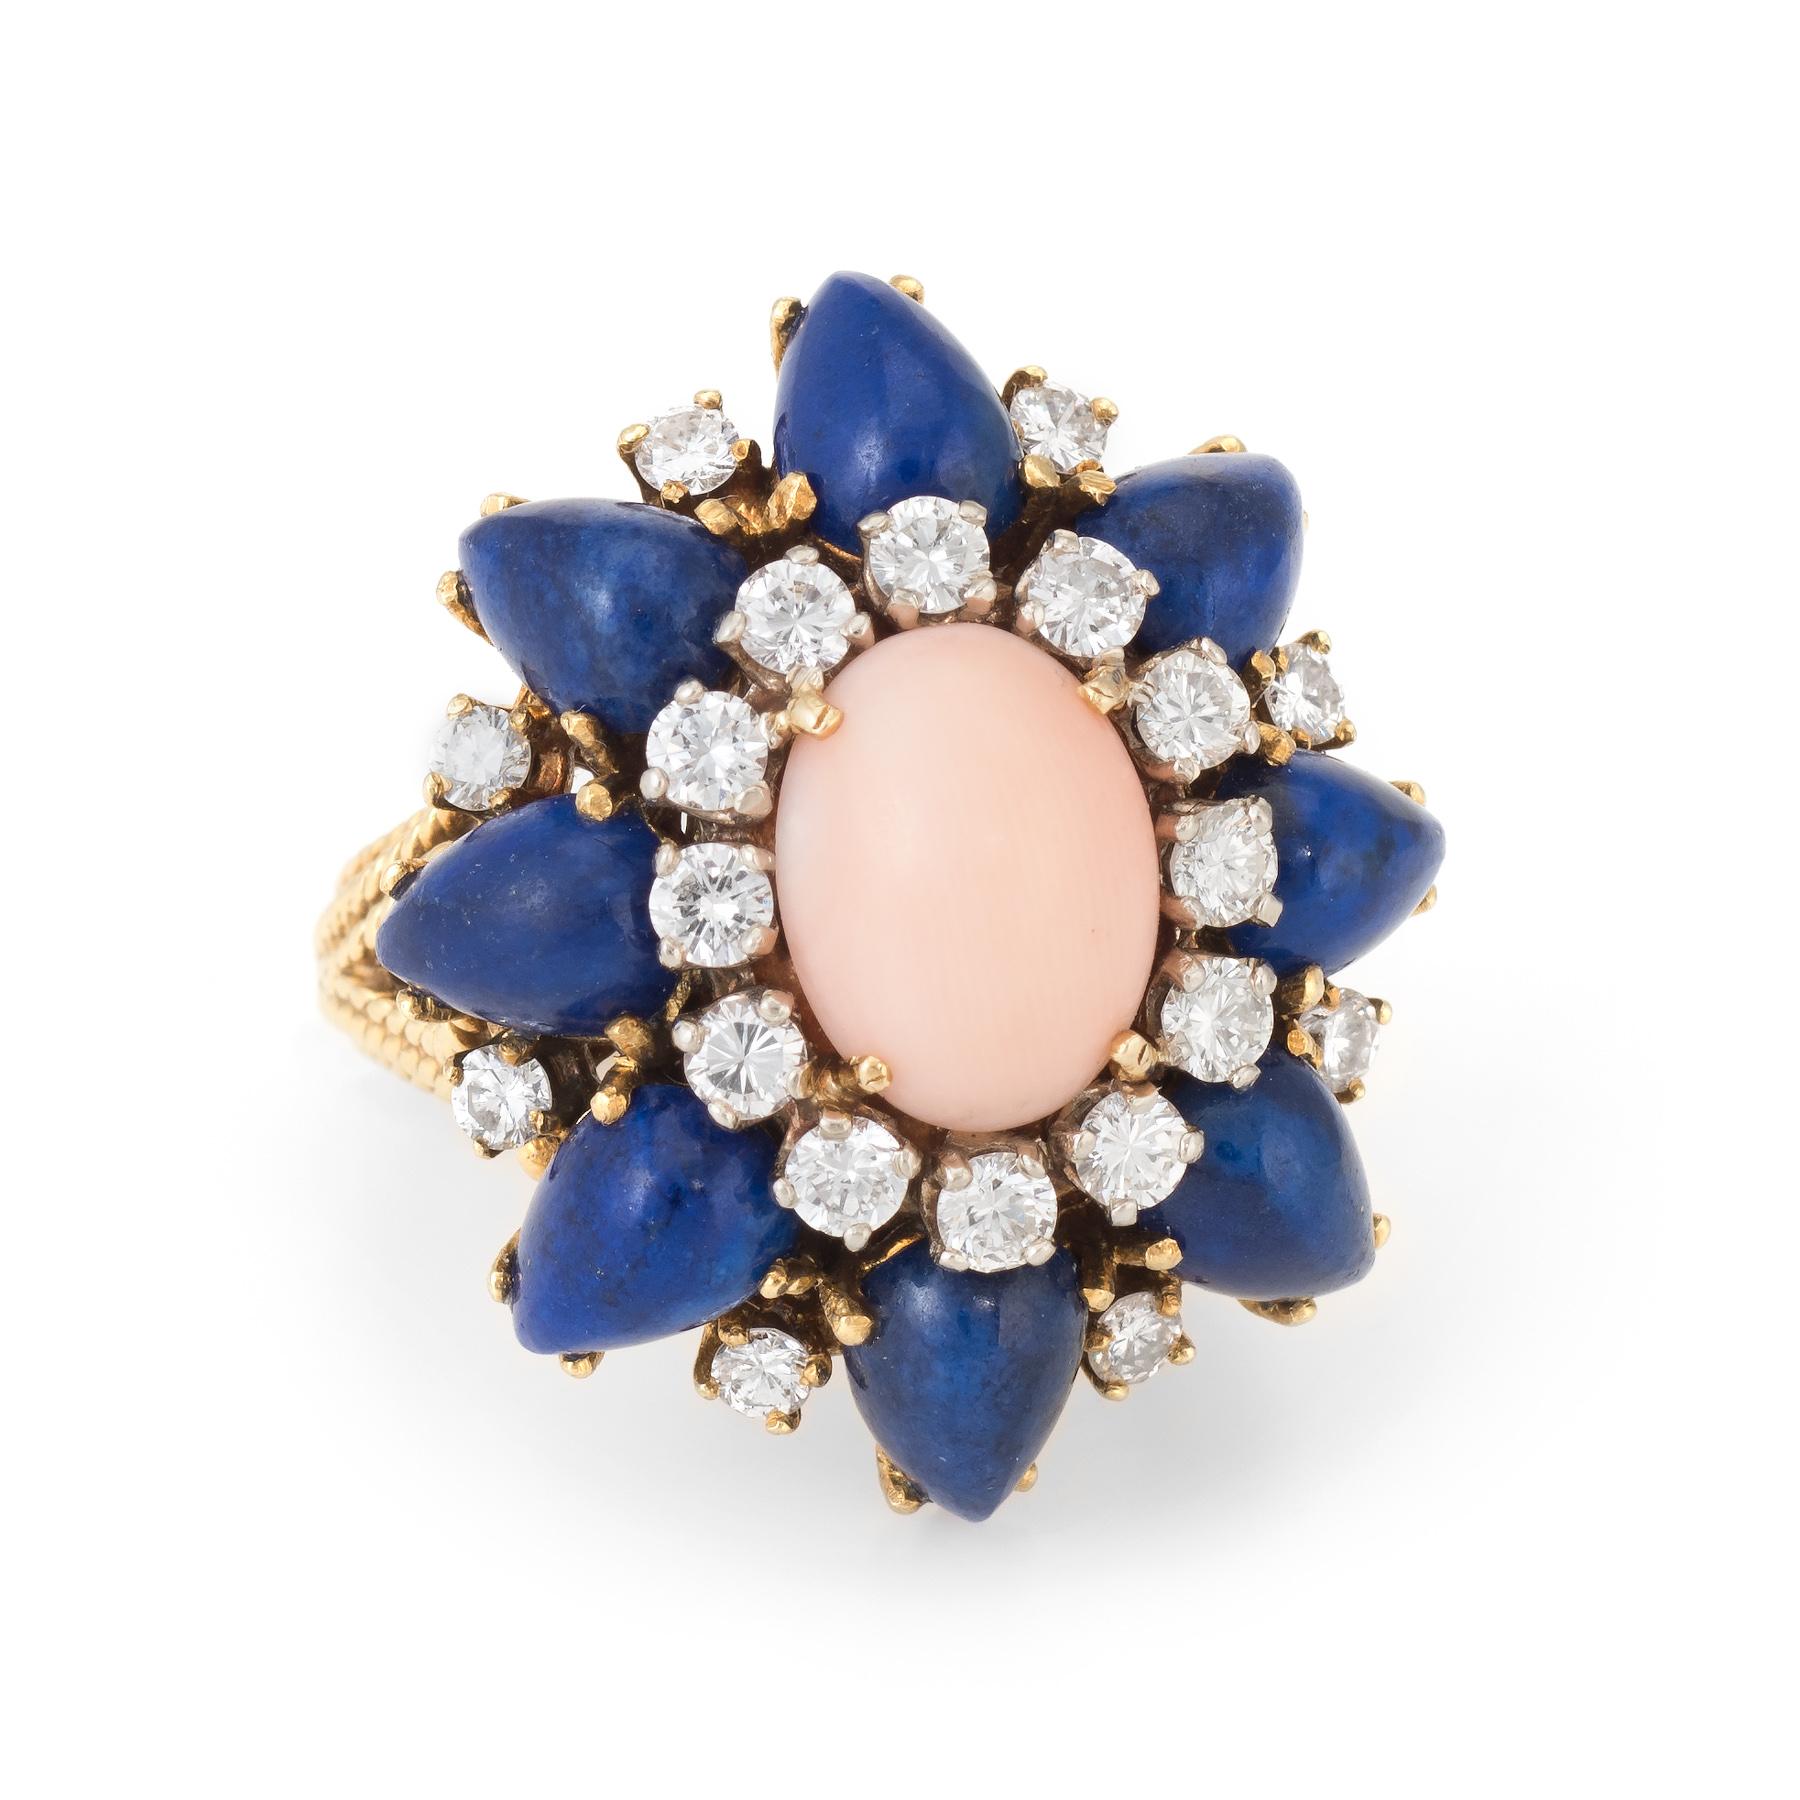 Finely detailed vintage cocktail ring (circa 1960s), crafted in 14 karat yellow gold. 

Centrally mounted angel skin coral measures 10mm x 7.75mm (estimated at 2 carats) is accented with 8 pieces of cabochon cut pear shaped lapis lazuli that